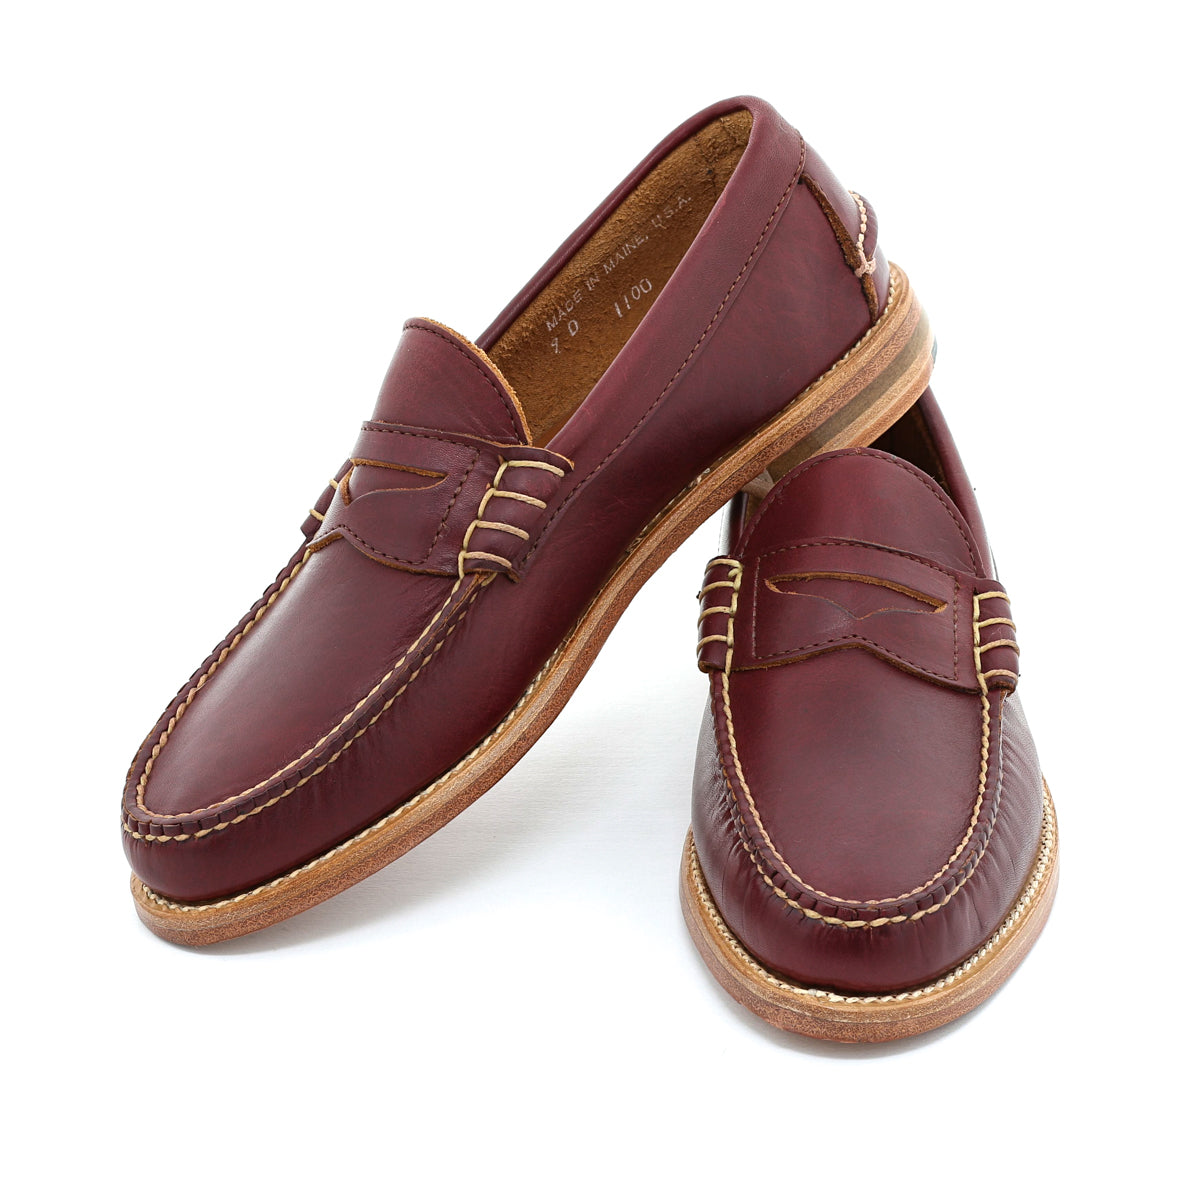 Pre-sale Beefroll Penny Loafers - Eggplant Honcho Rancourt & Co. | Men's Boots and Shoes